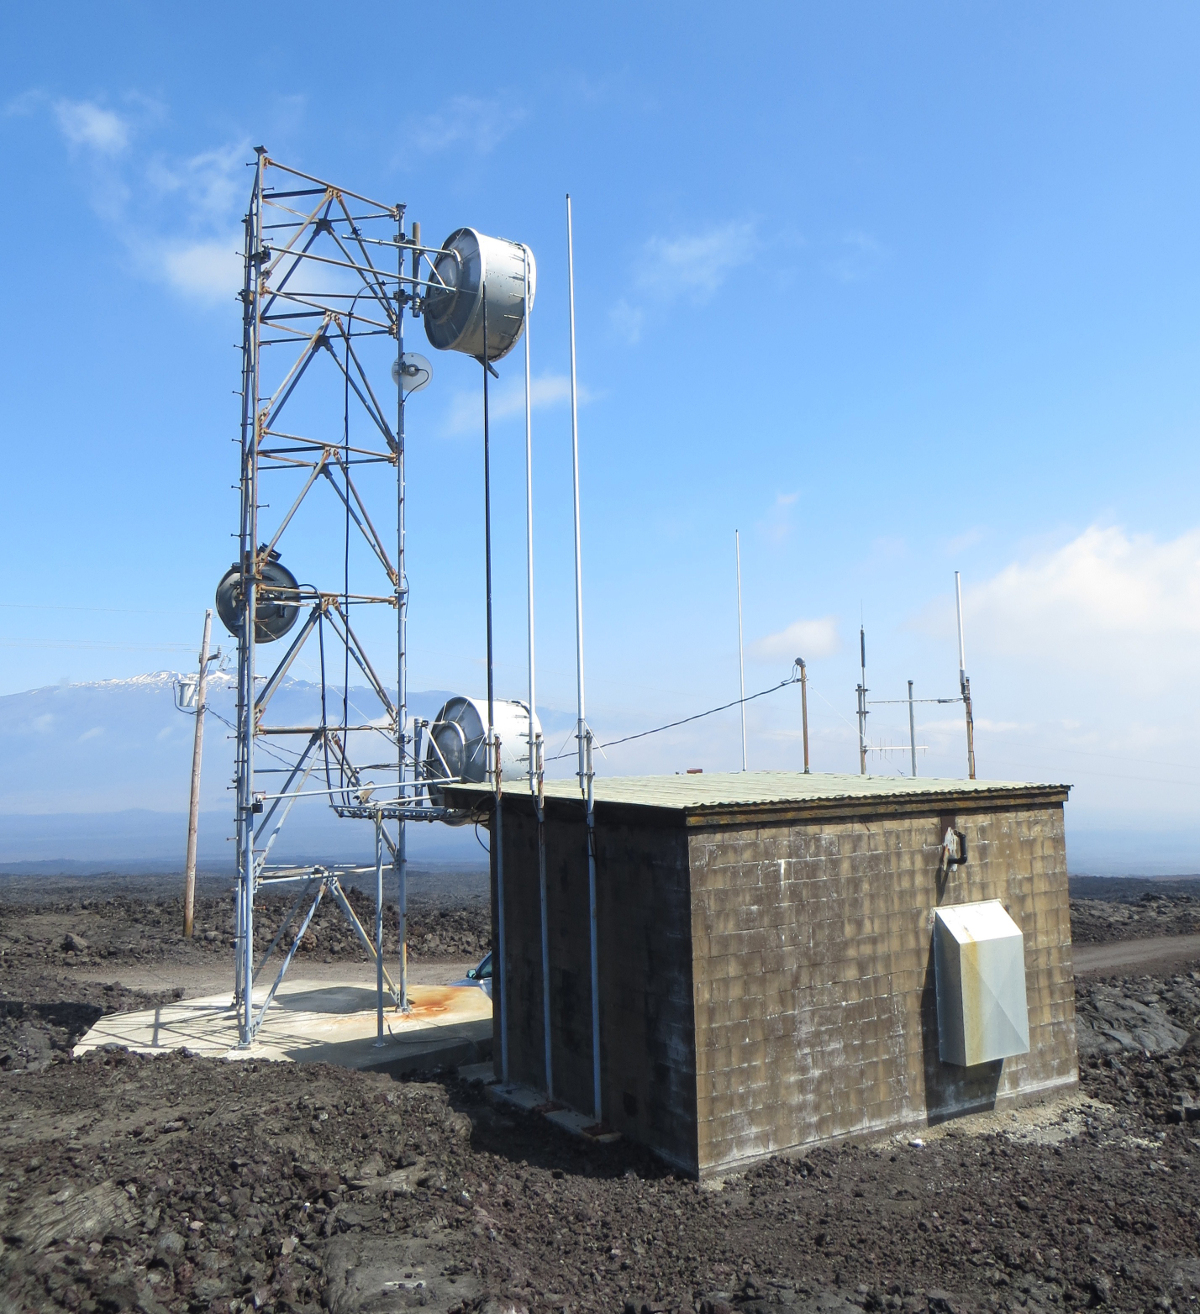 The Mauna Loa tower, one of 15 tower sites that comprise the Anuenue digital microwave system throughout the Hawaiian Islands (U.S. Coast Guard photo)